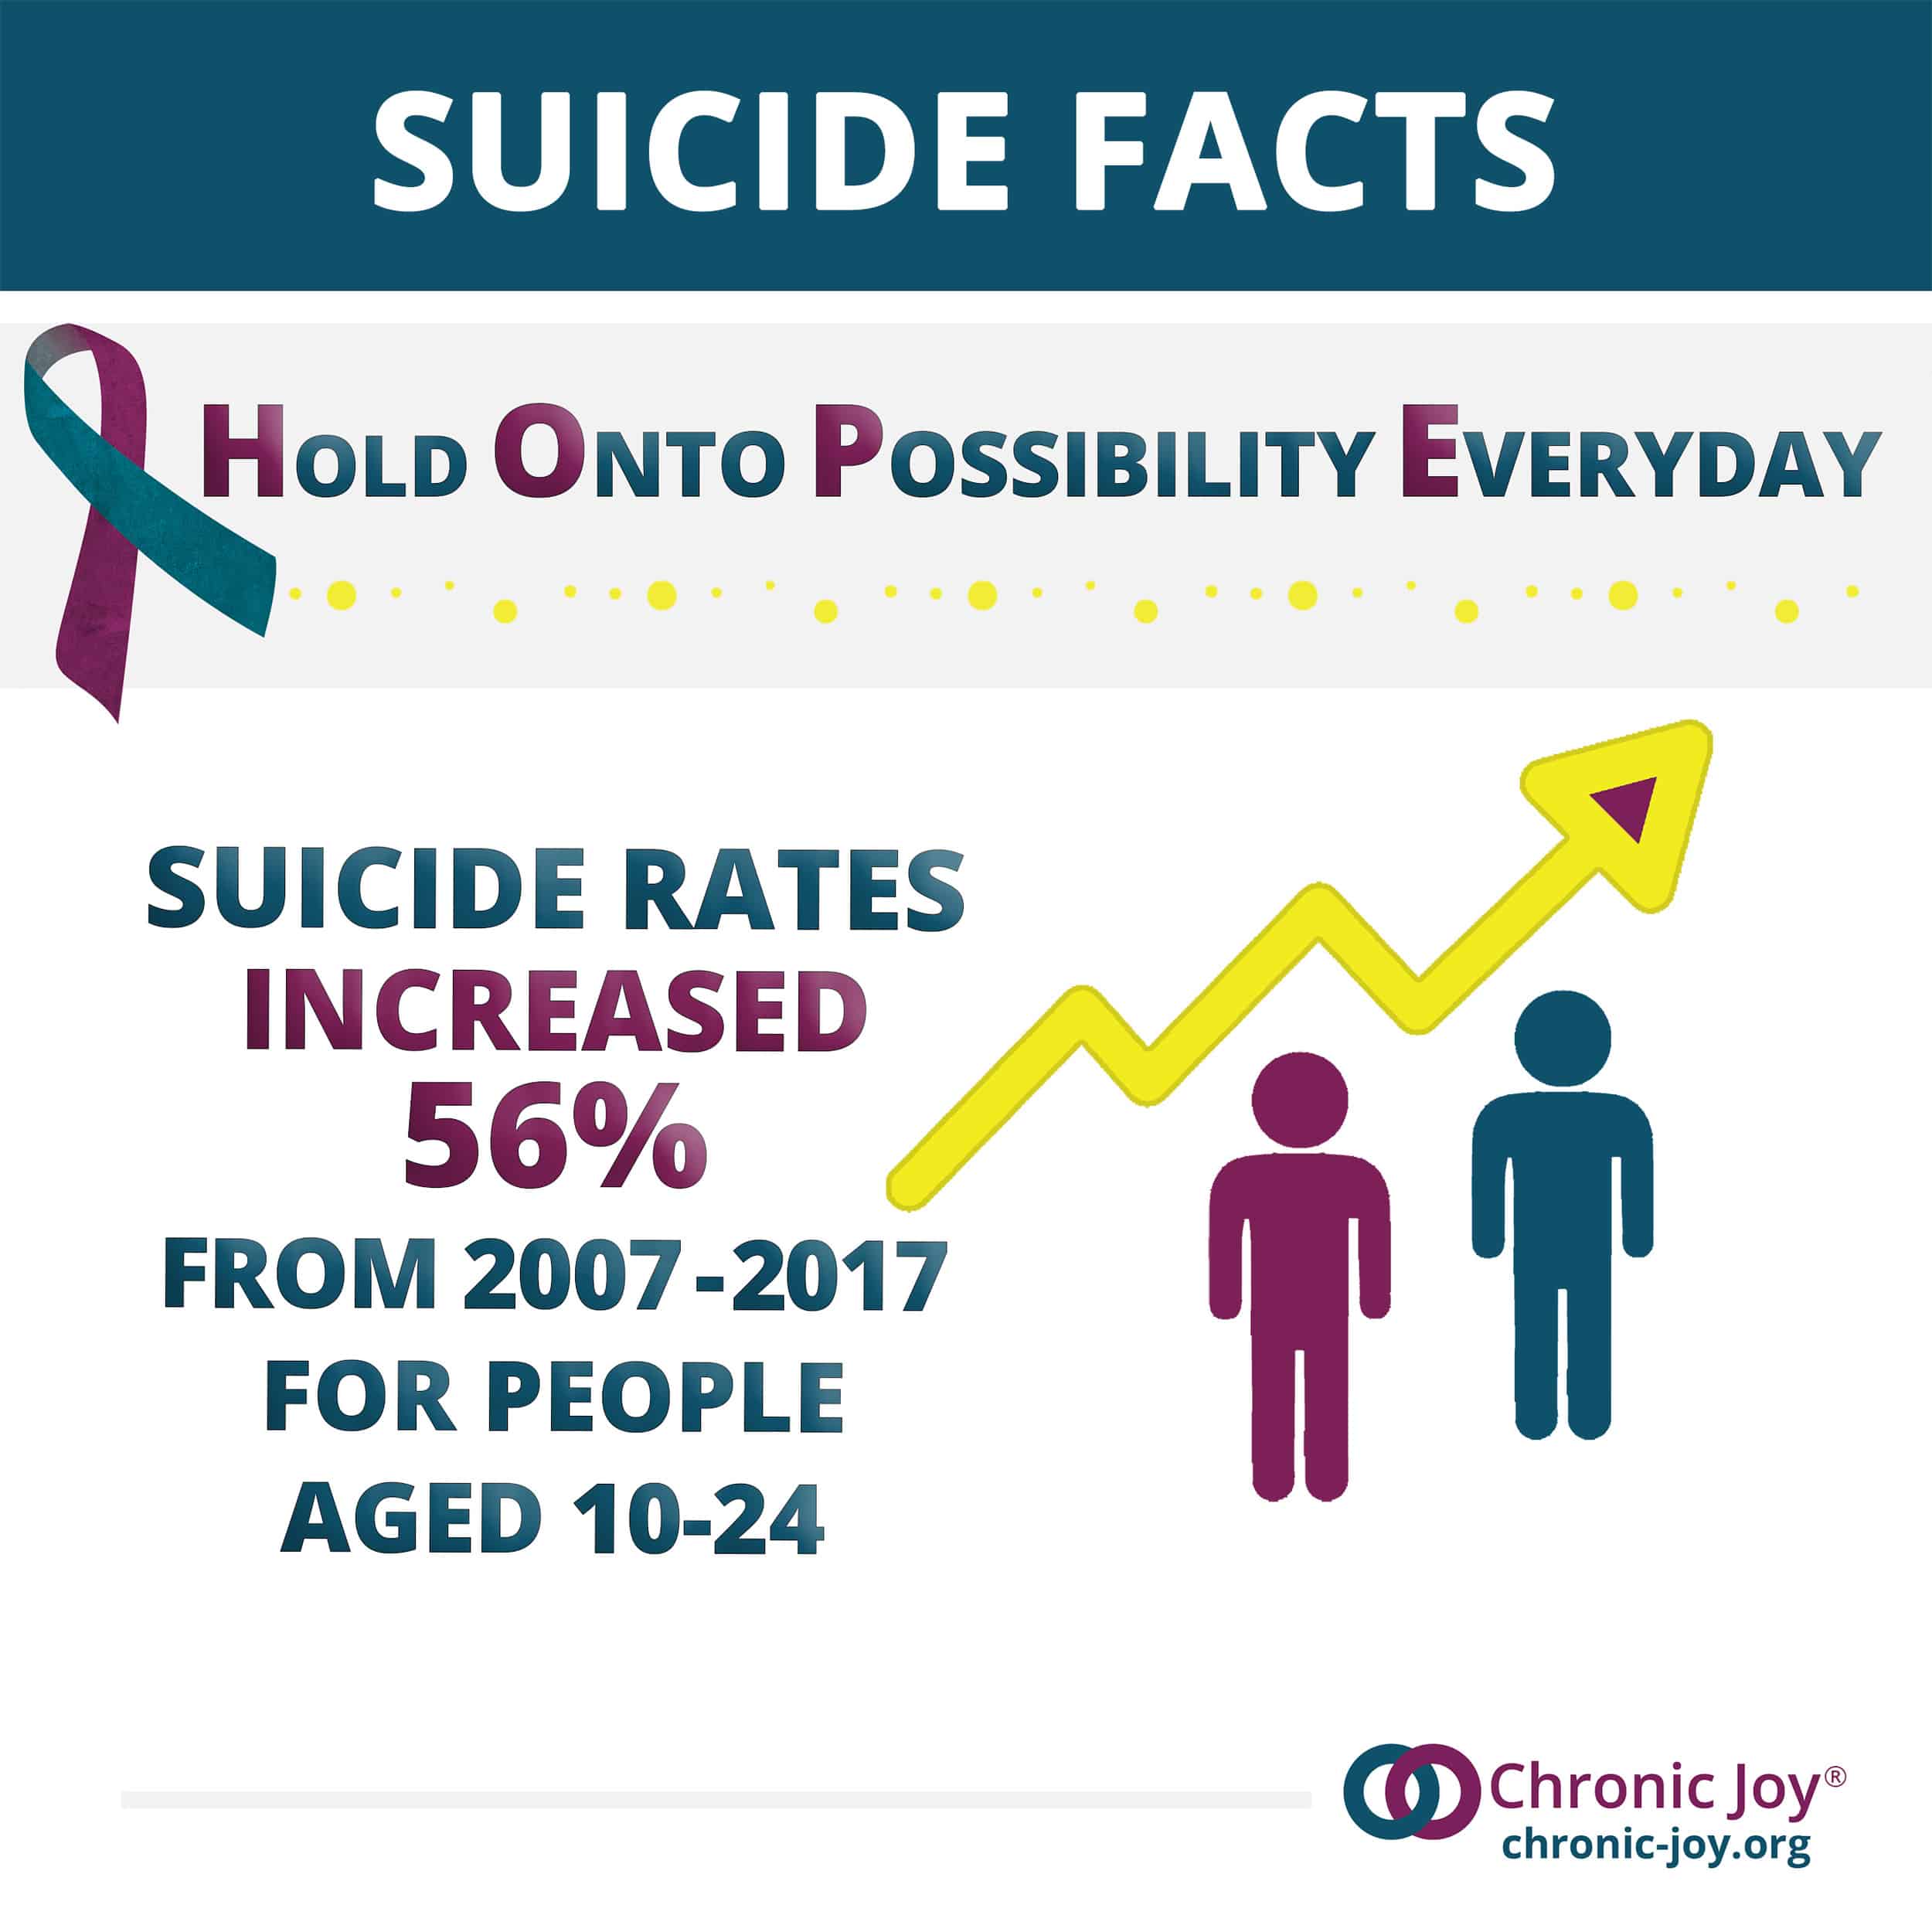 From 2007 to 2017 suicide increased 56% for people aged 10-24.